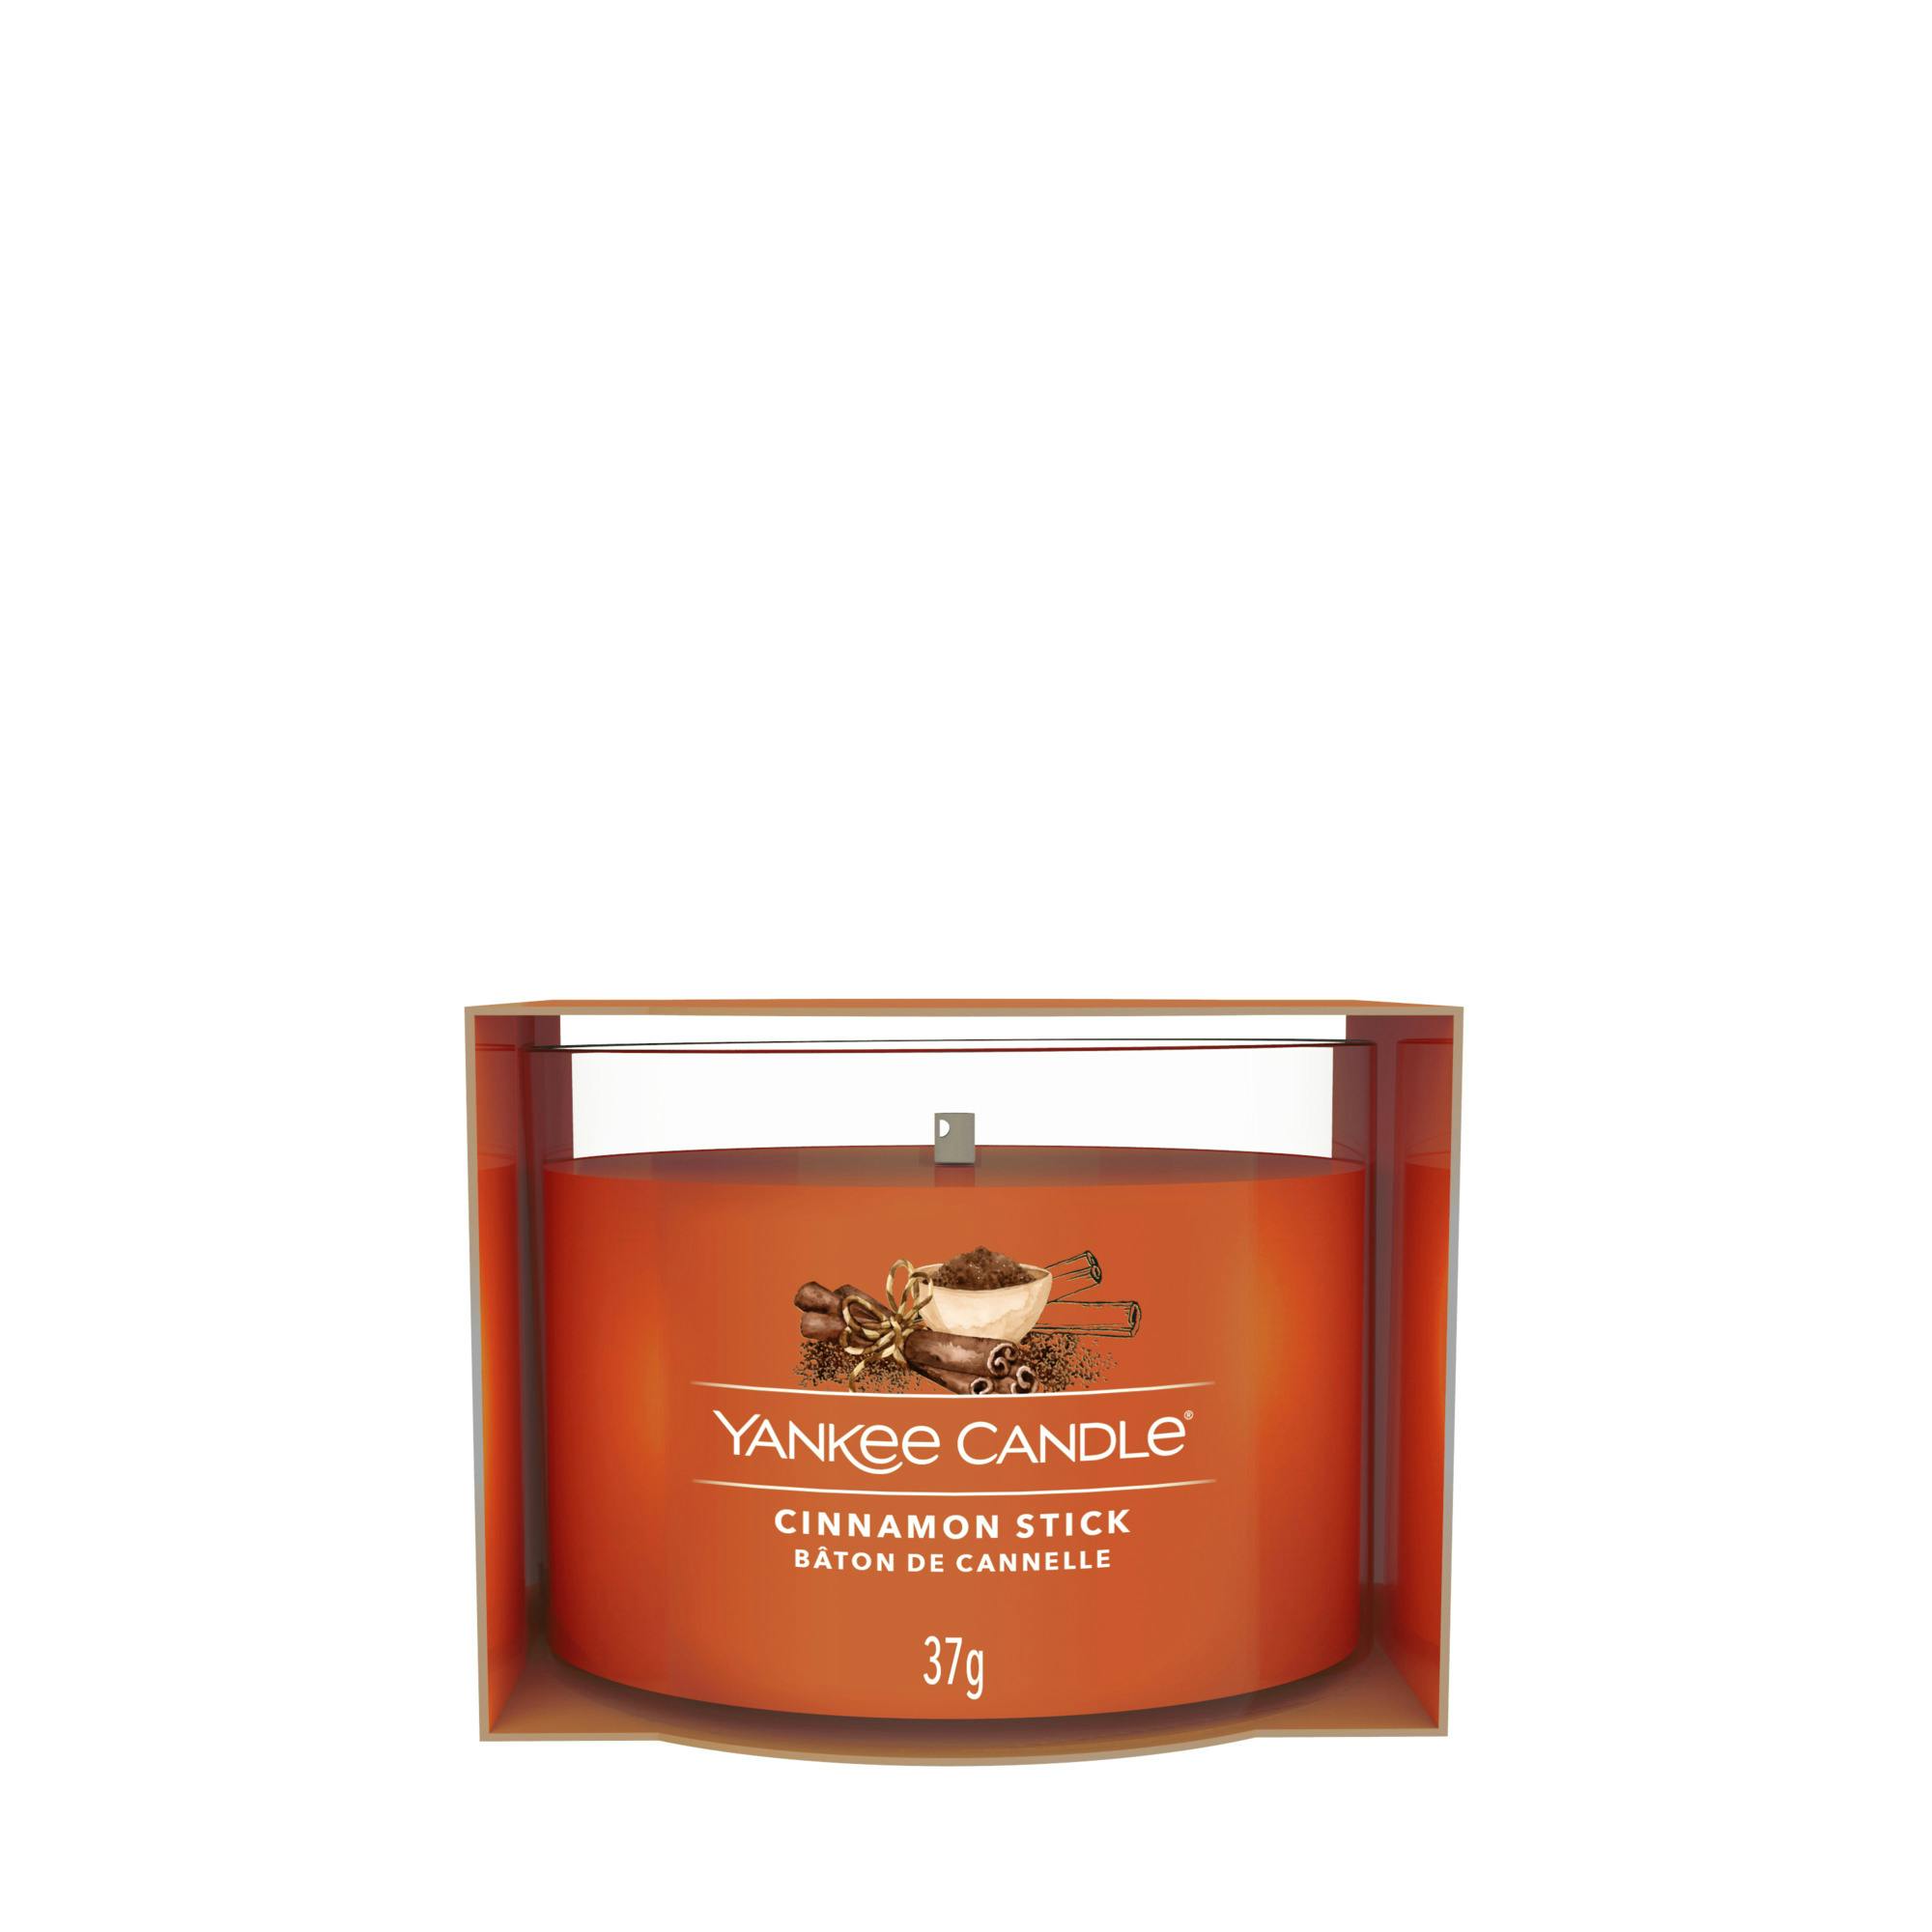 Yankee Candle Filled Votice Cinnamon Stick 37 g